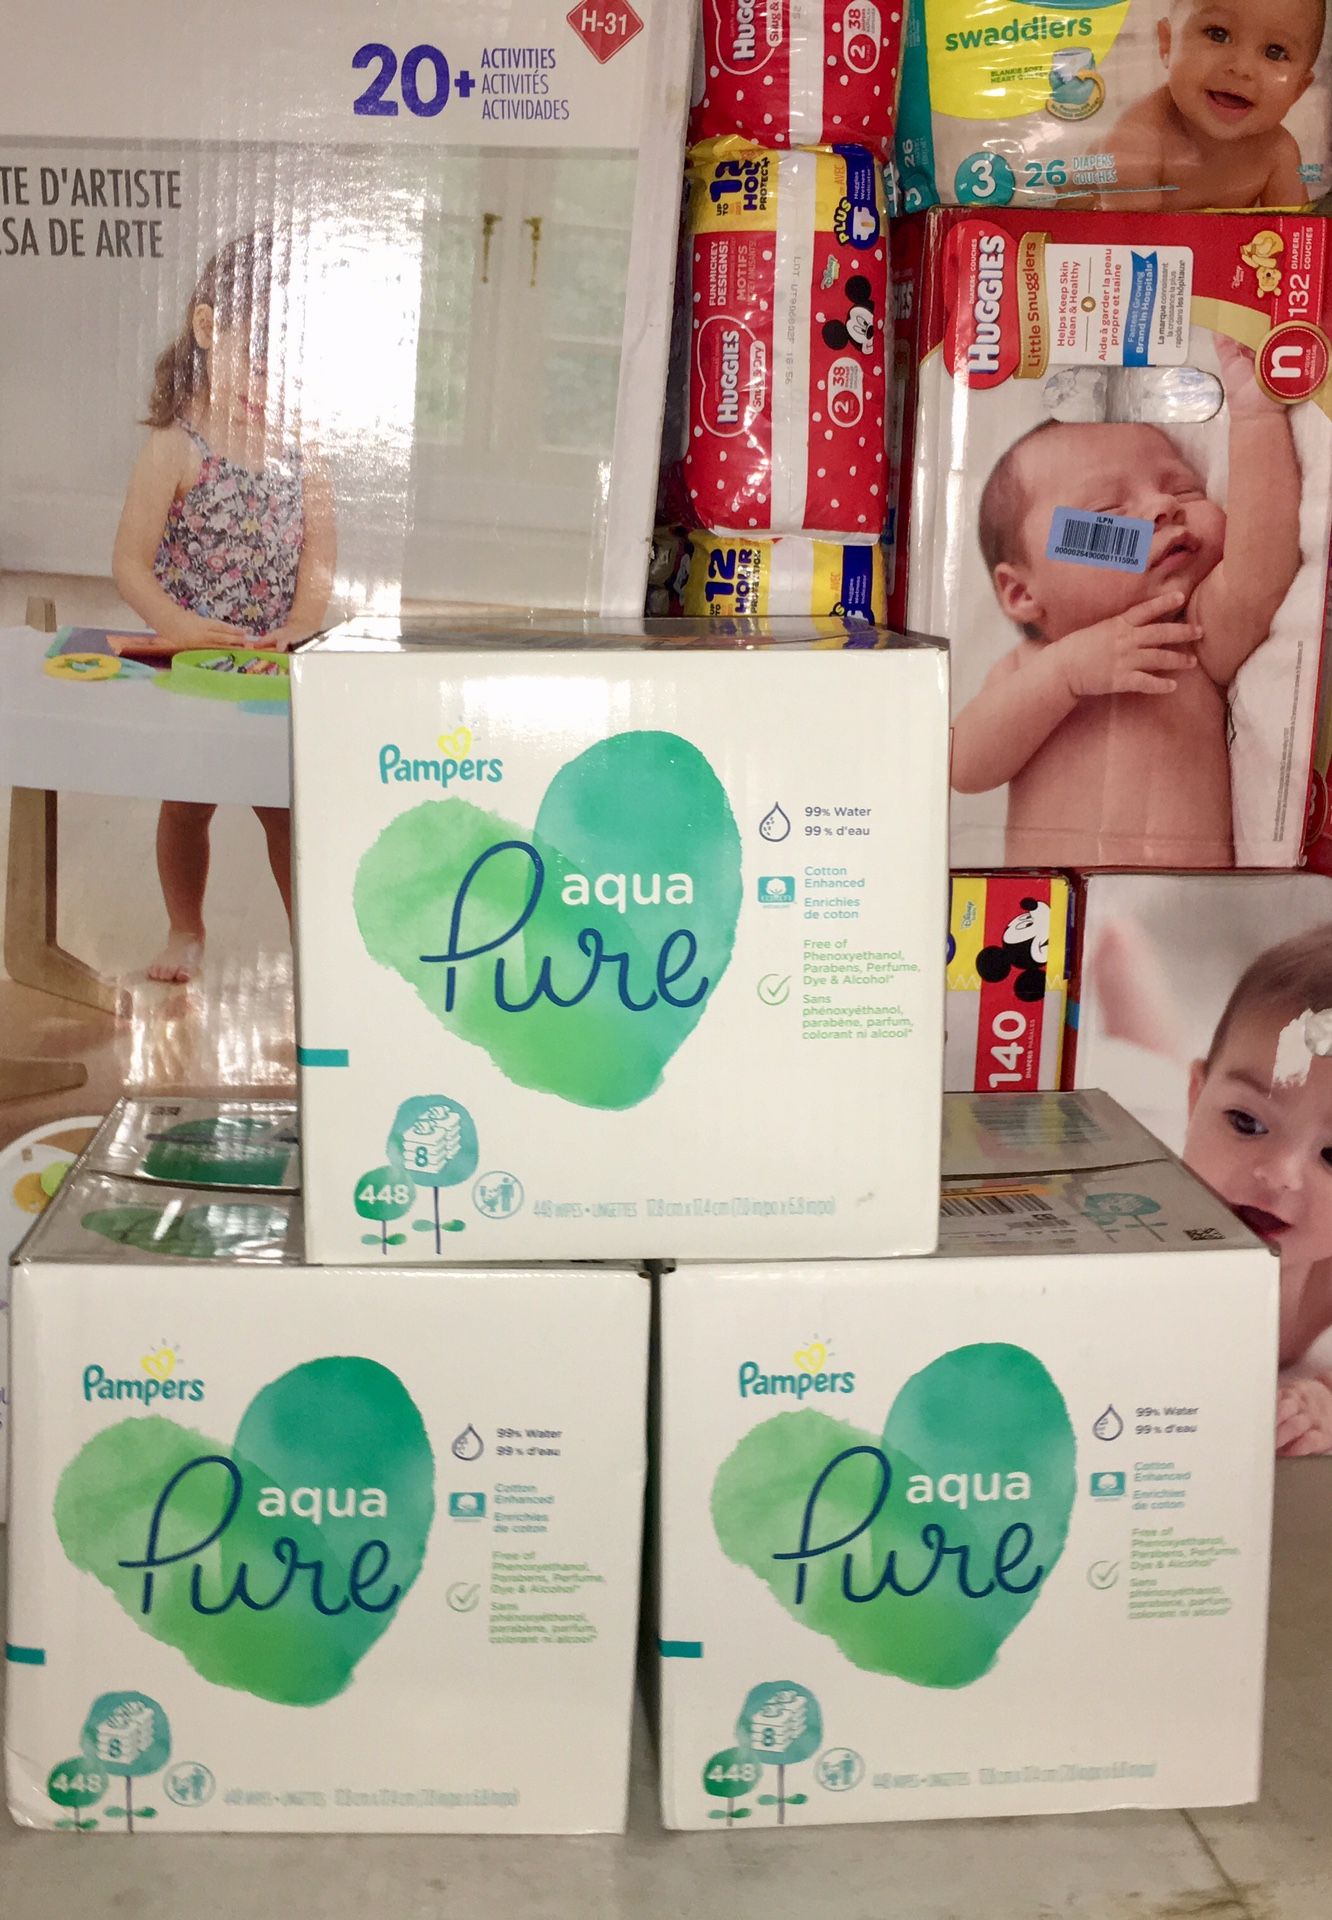 Pampers Aqua Pure wipes 448 count